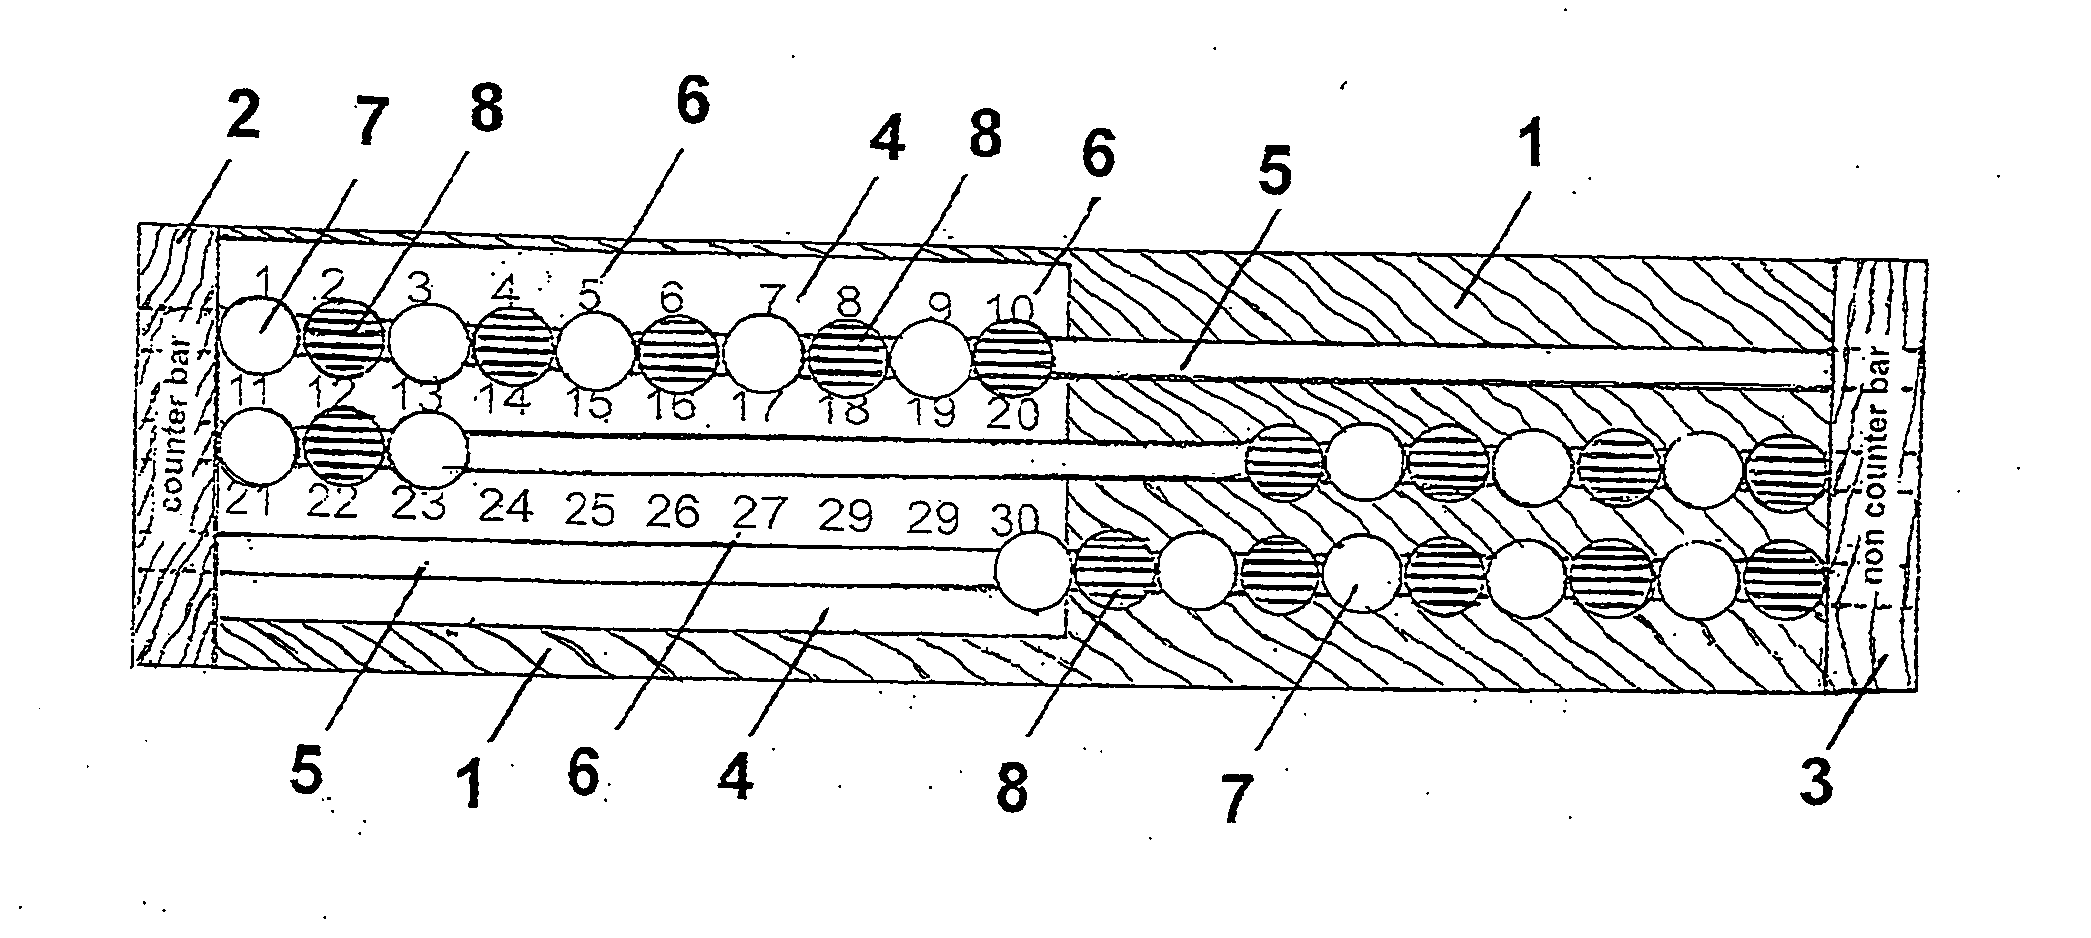 Use of colored beads in an augmented simple abacus